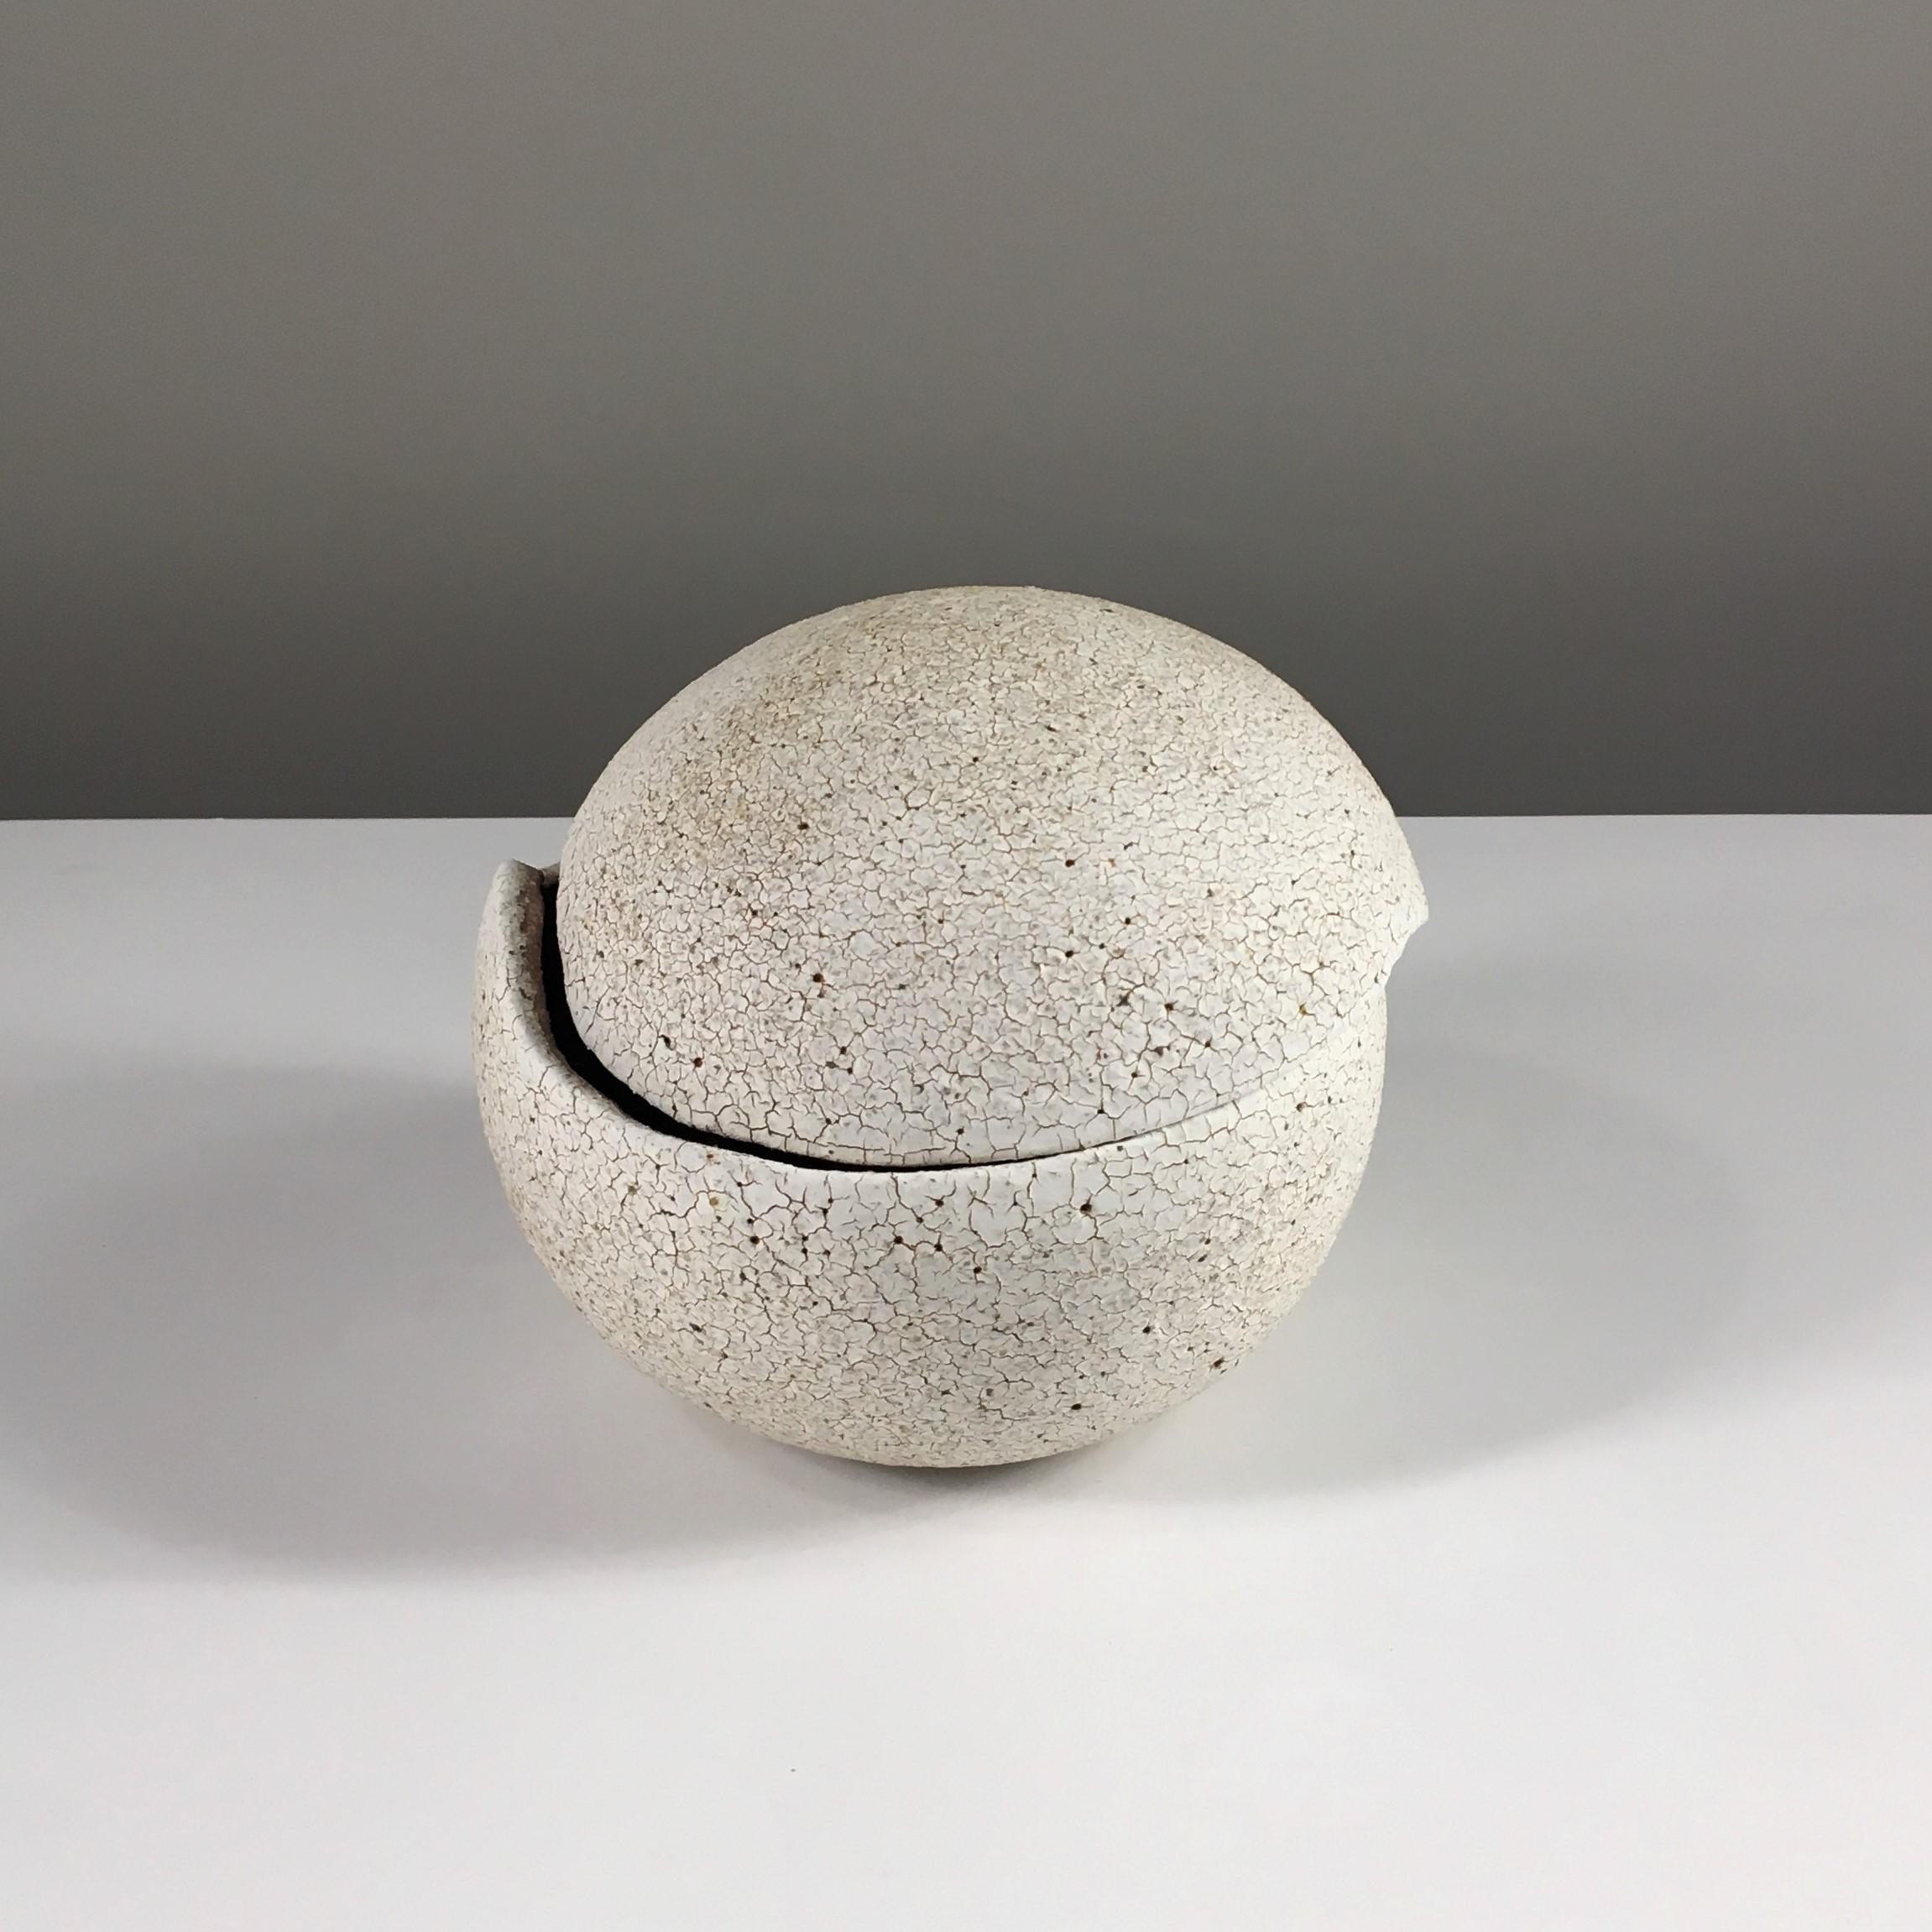 Covered Orb Vessel Pottery by Yumiko Kuga.  Measures:  H 6.75